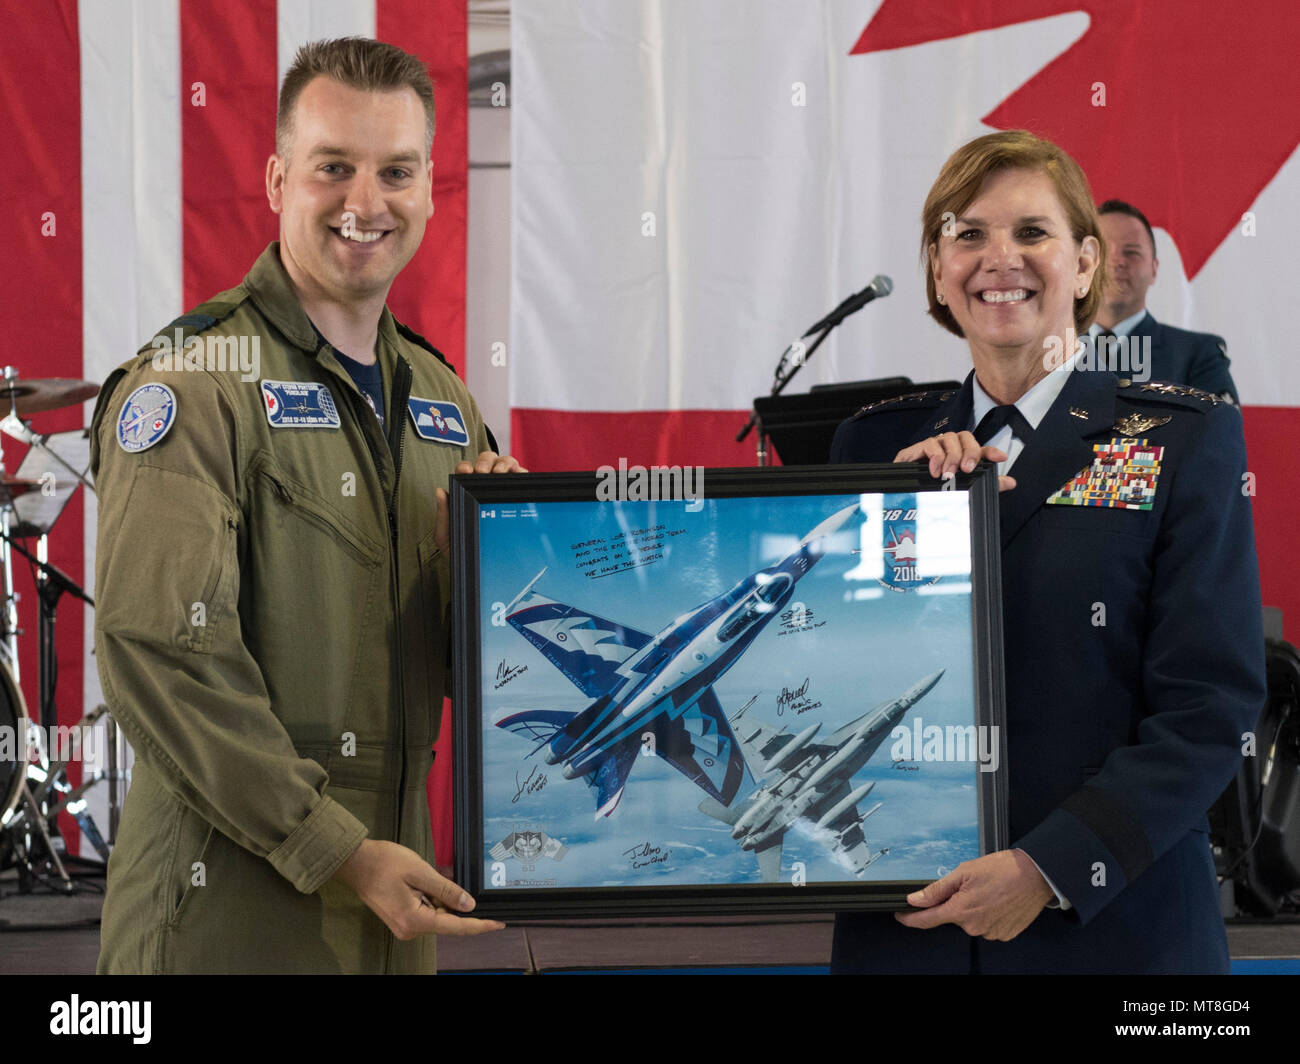 Royal Canadian Air Force Capt. Stephan Porteus presents Gen. Lori J. Robinson, commander of North American Aerospace Defense Command and U.S. Northern Command, with a lithograph at the NORAD 60th Anniversary Ceremony on Peterson Air Force Base Colorado, May 12, 2018. The ceremony and static display of various NORAD aircraft was the culmination of a three-day event, which included a media tour of Cheyenne Mountain Air Force Station, the dedication of a cairn outside the commands' headquarters building memorializing the Canadians who have passed away while serving NORAD, and a fly over in missin Stock Photo